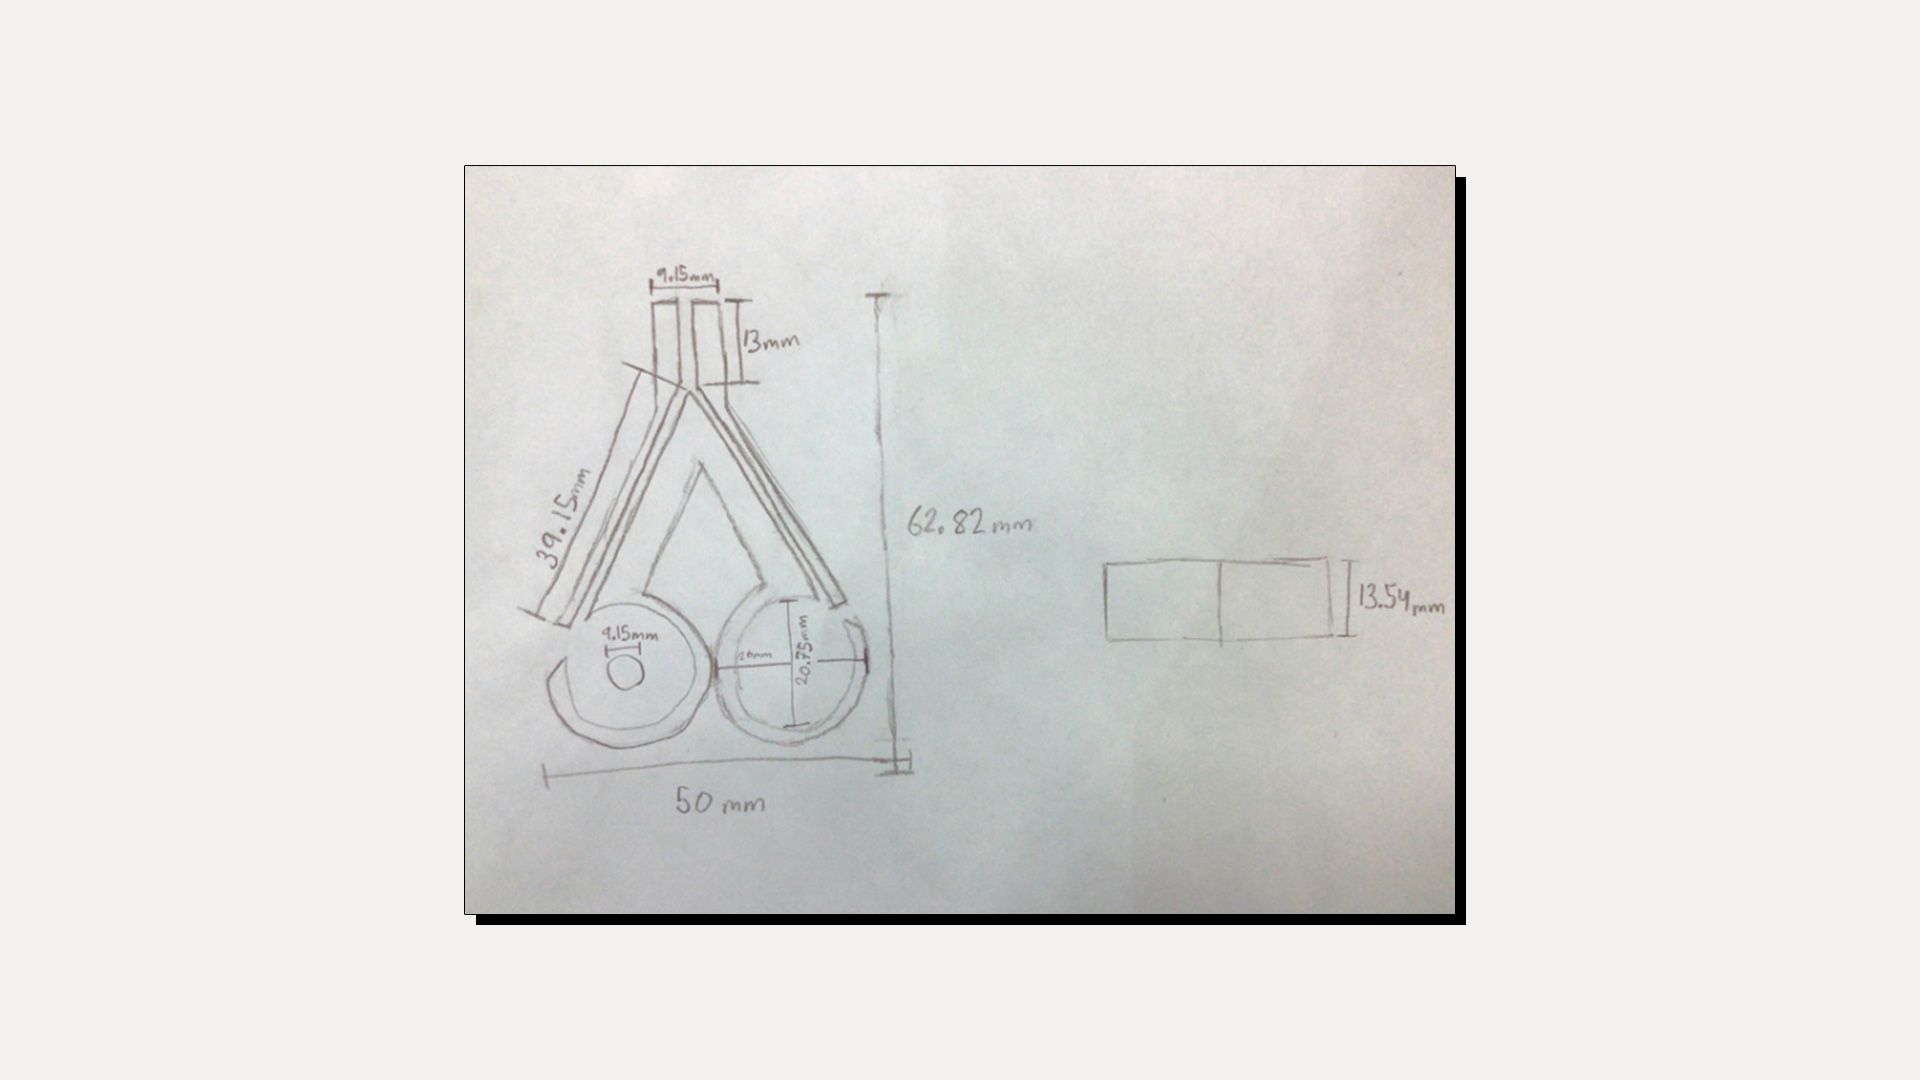 Sketch of a whistle, annotated with dimensions.